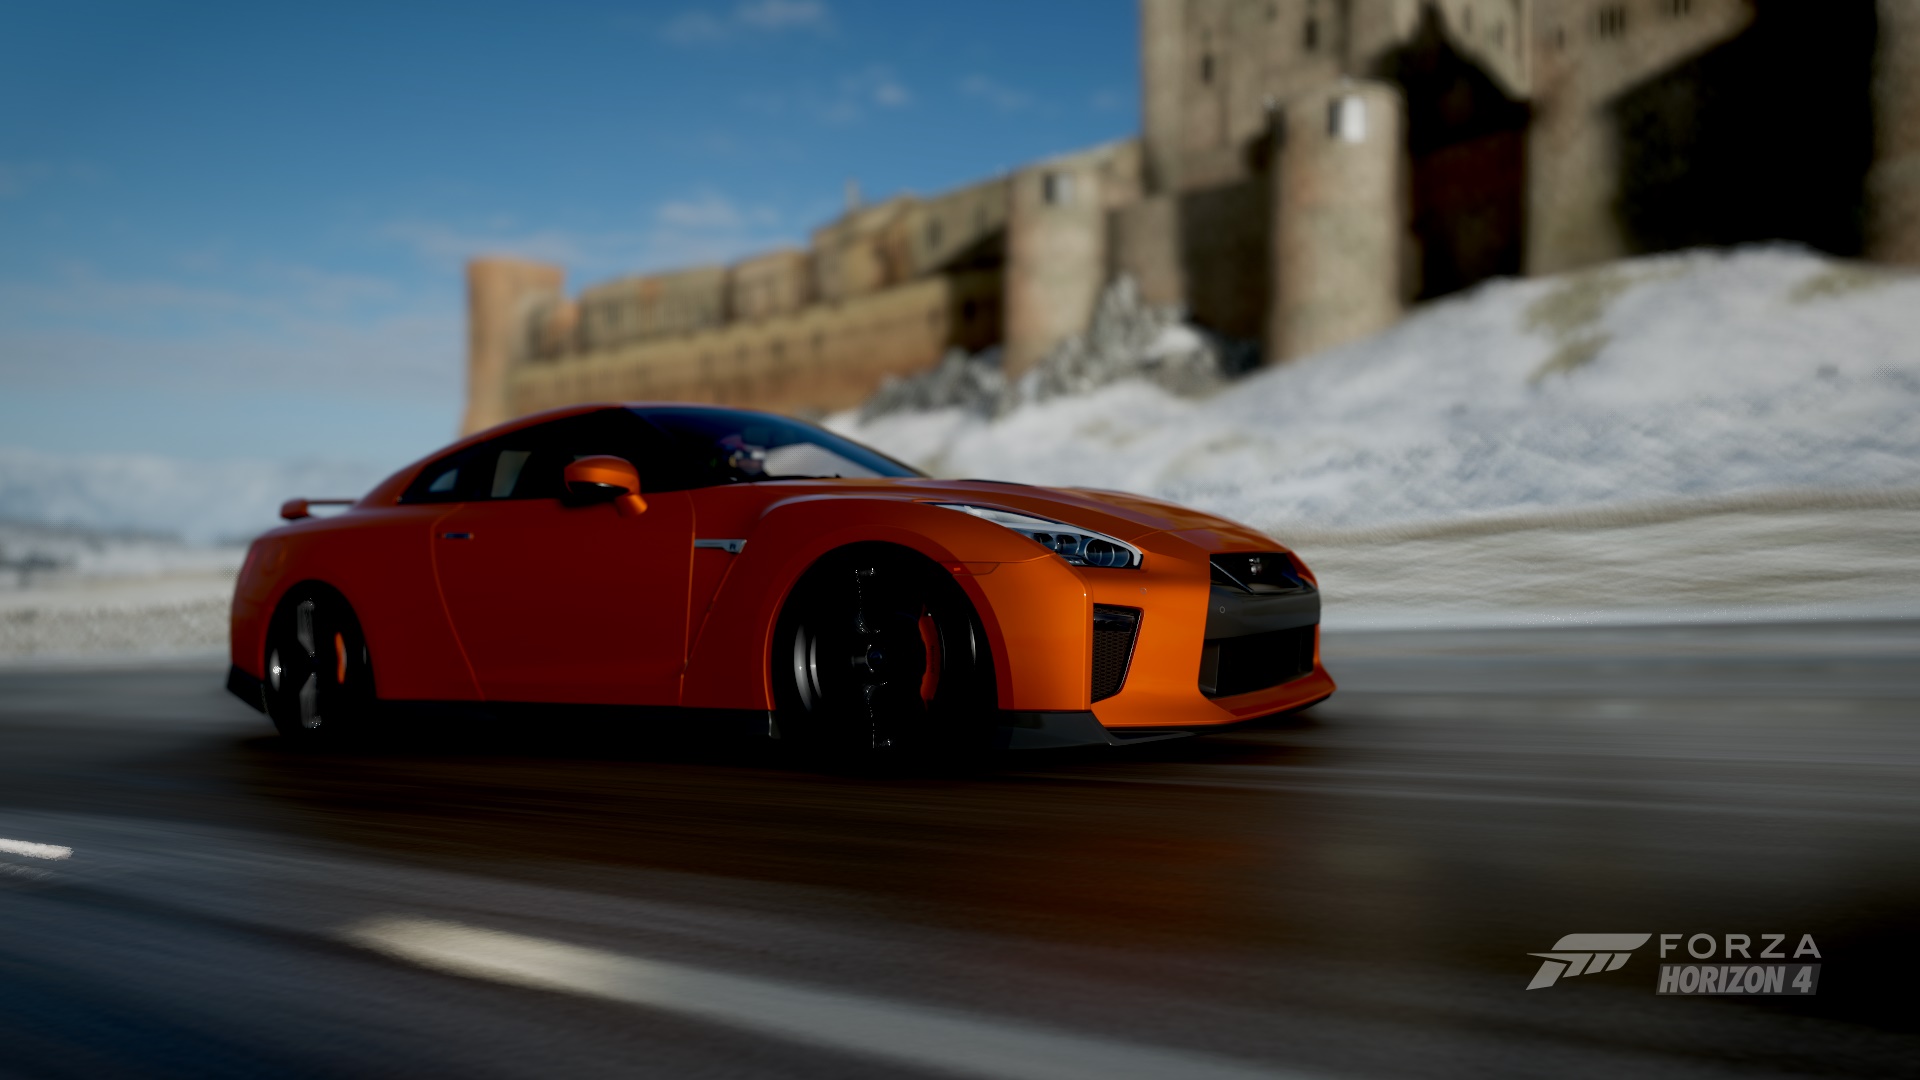 General 1920x1080 Nissan GT-R castle winter racing video games Forza Horizon 4 PlaygroundGames Nissan Japanese cars